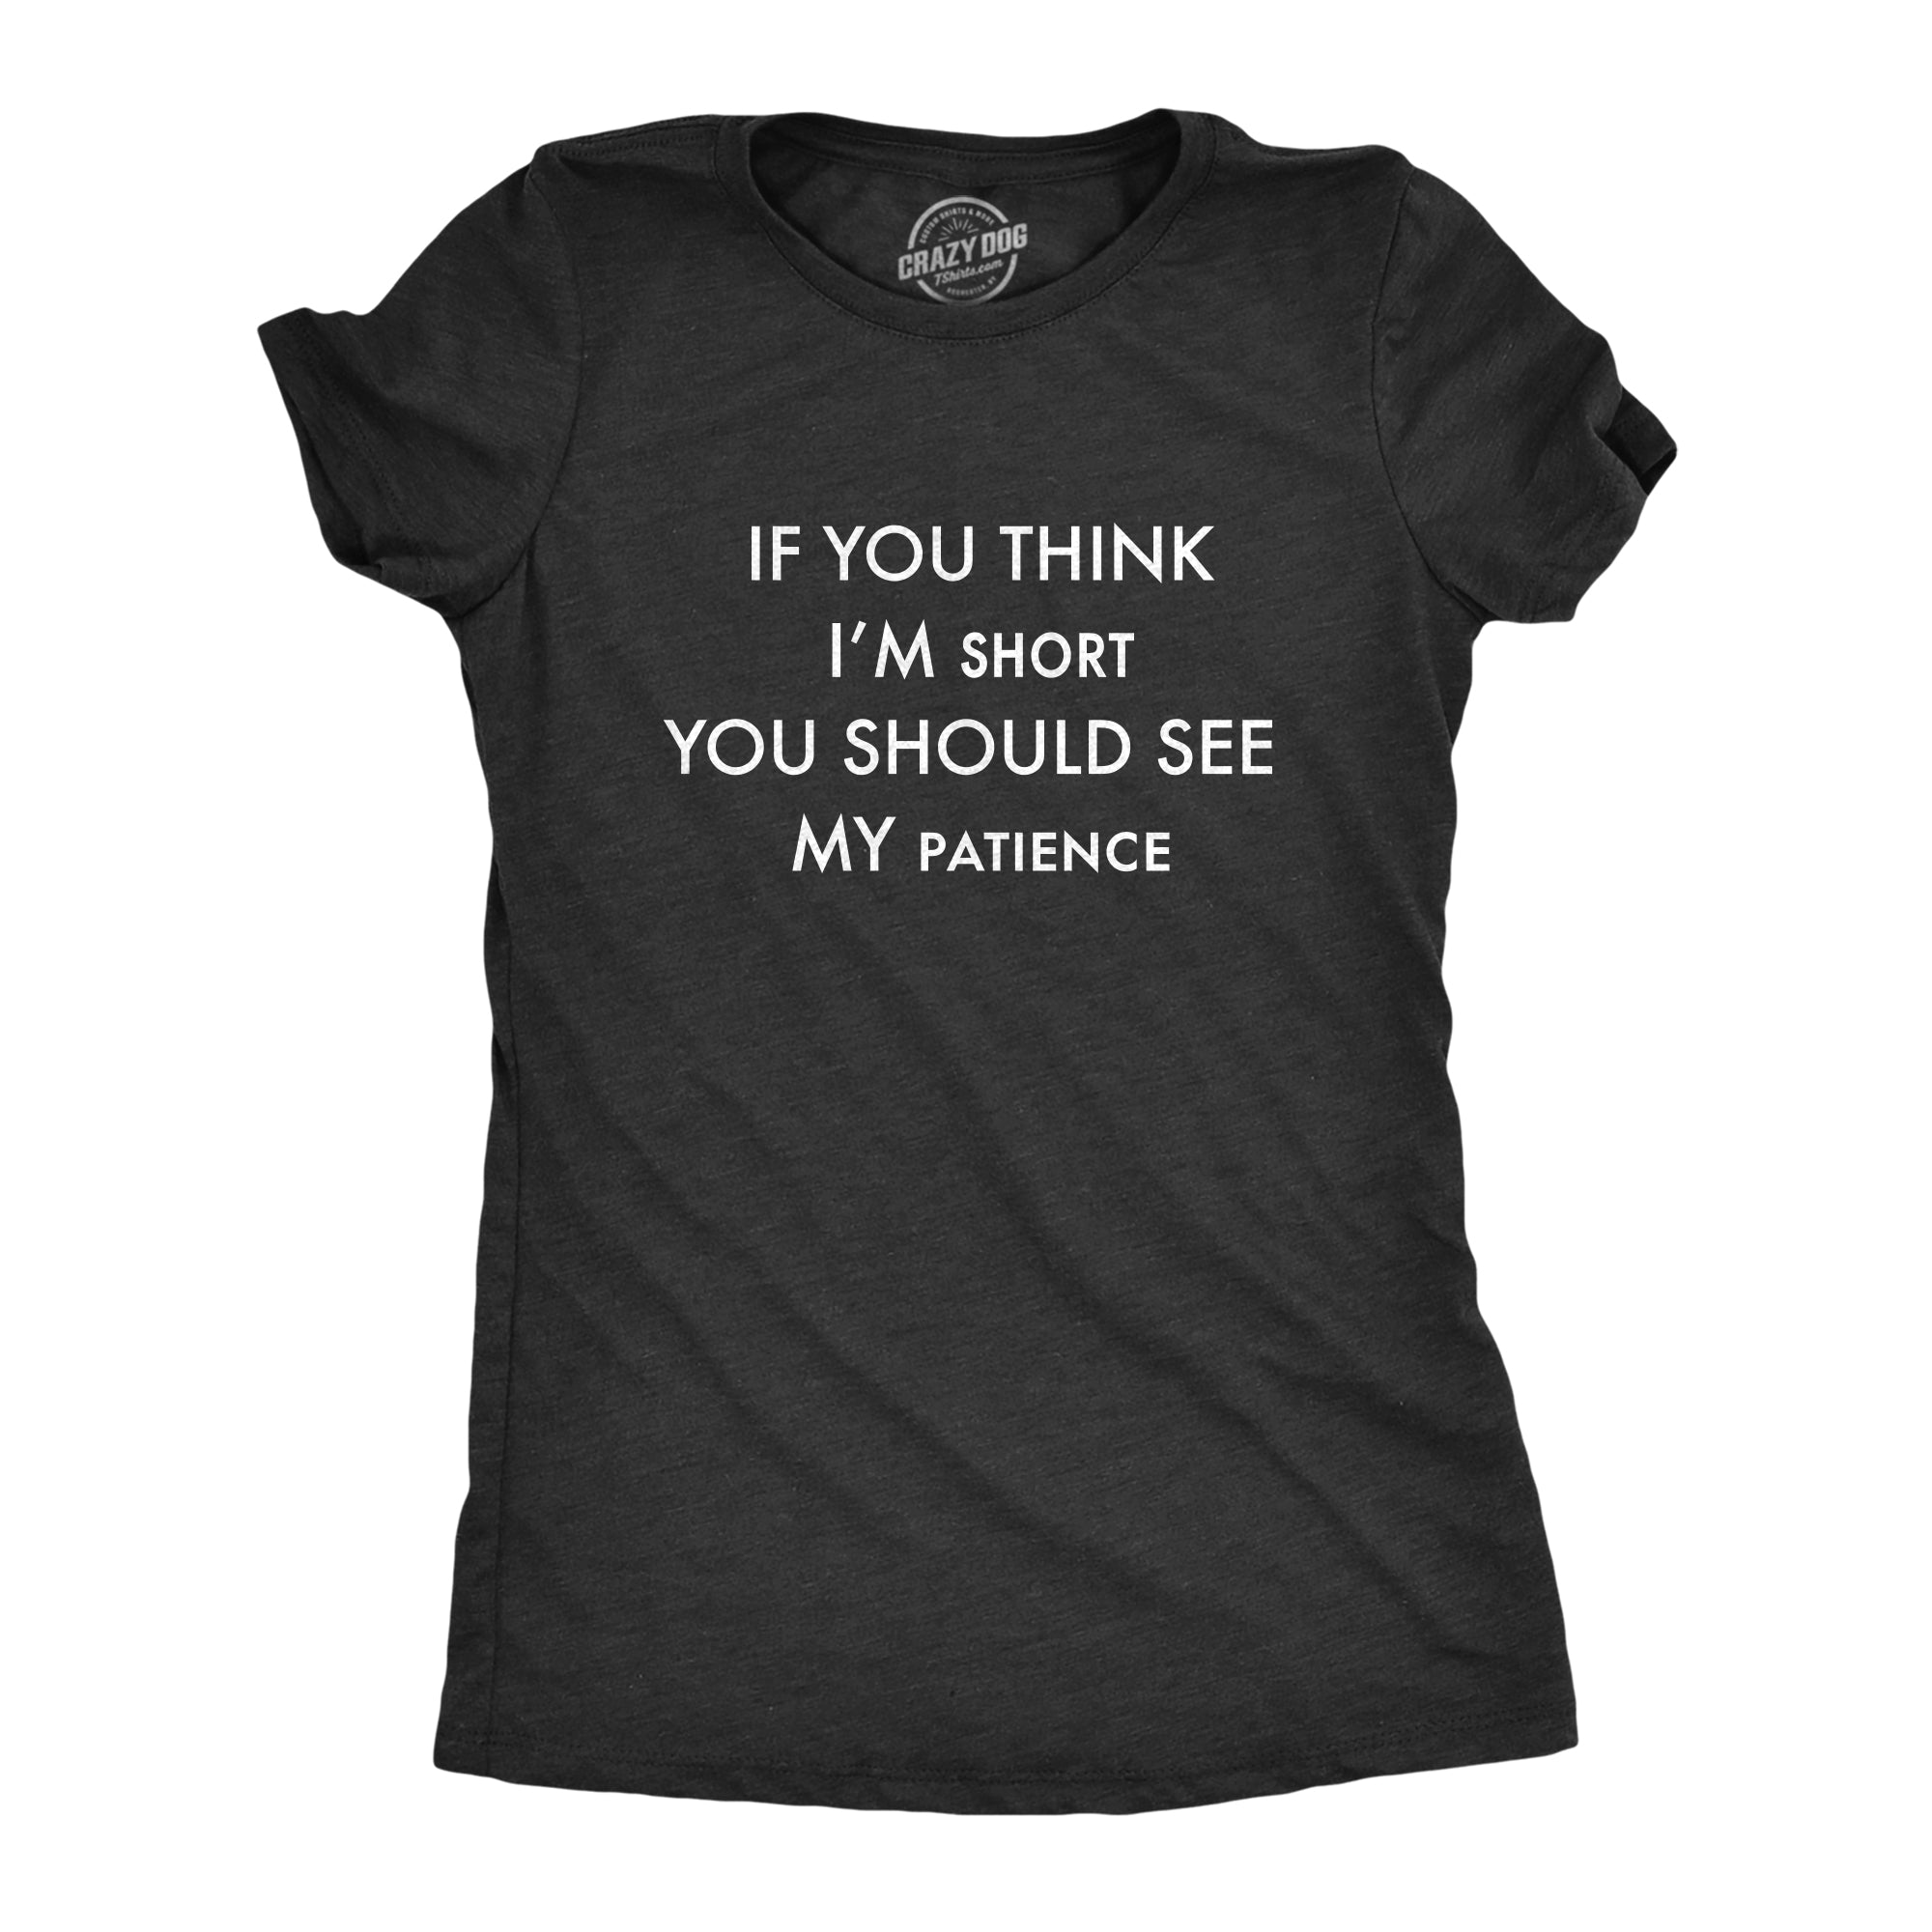 Funny Heather Black - Short Patience If You Think I'm Short You Should See My Patience Womens T Shirt Nerdy Sarcastic Tee